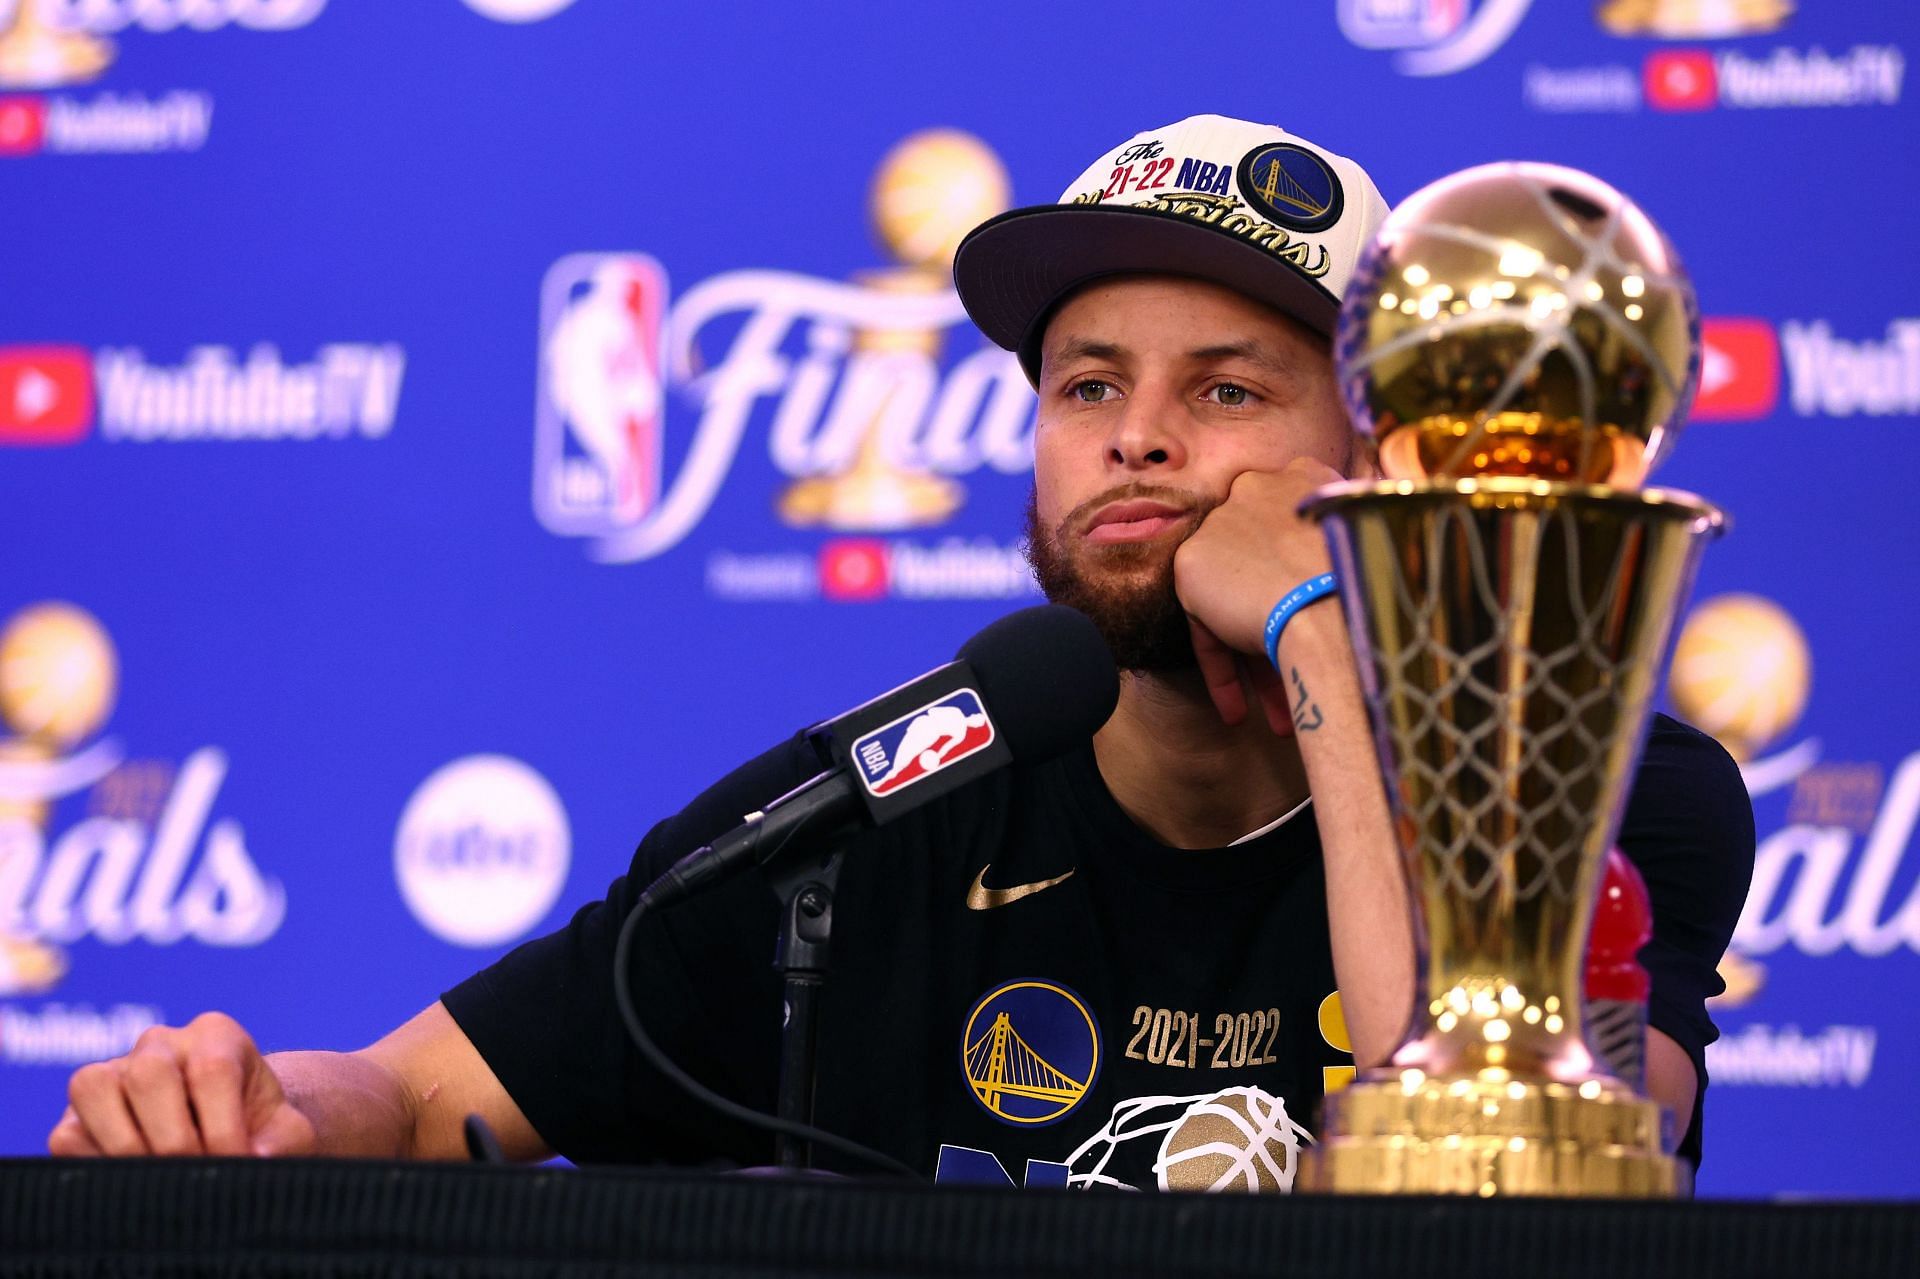 Steph Curry of the Golden State Warriors speaks to the media after defeating the Boston Celtics 103-90 in Game 6 to win the NBA Finals on June 16 in Boston, Massachusetts